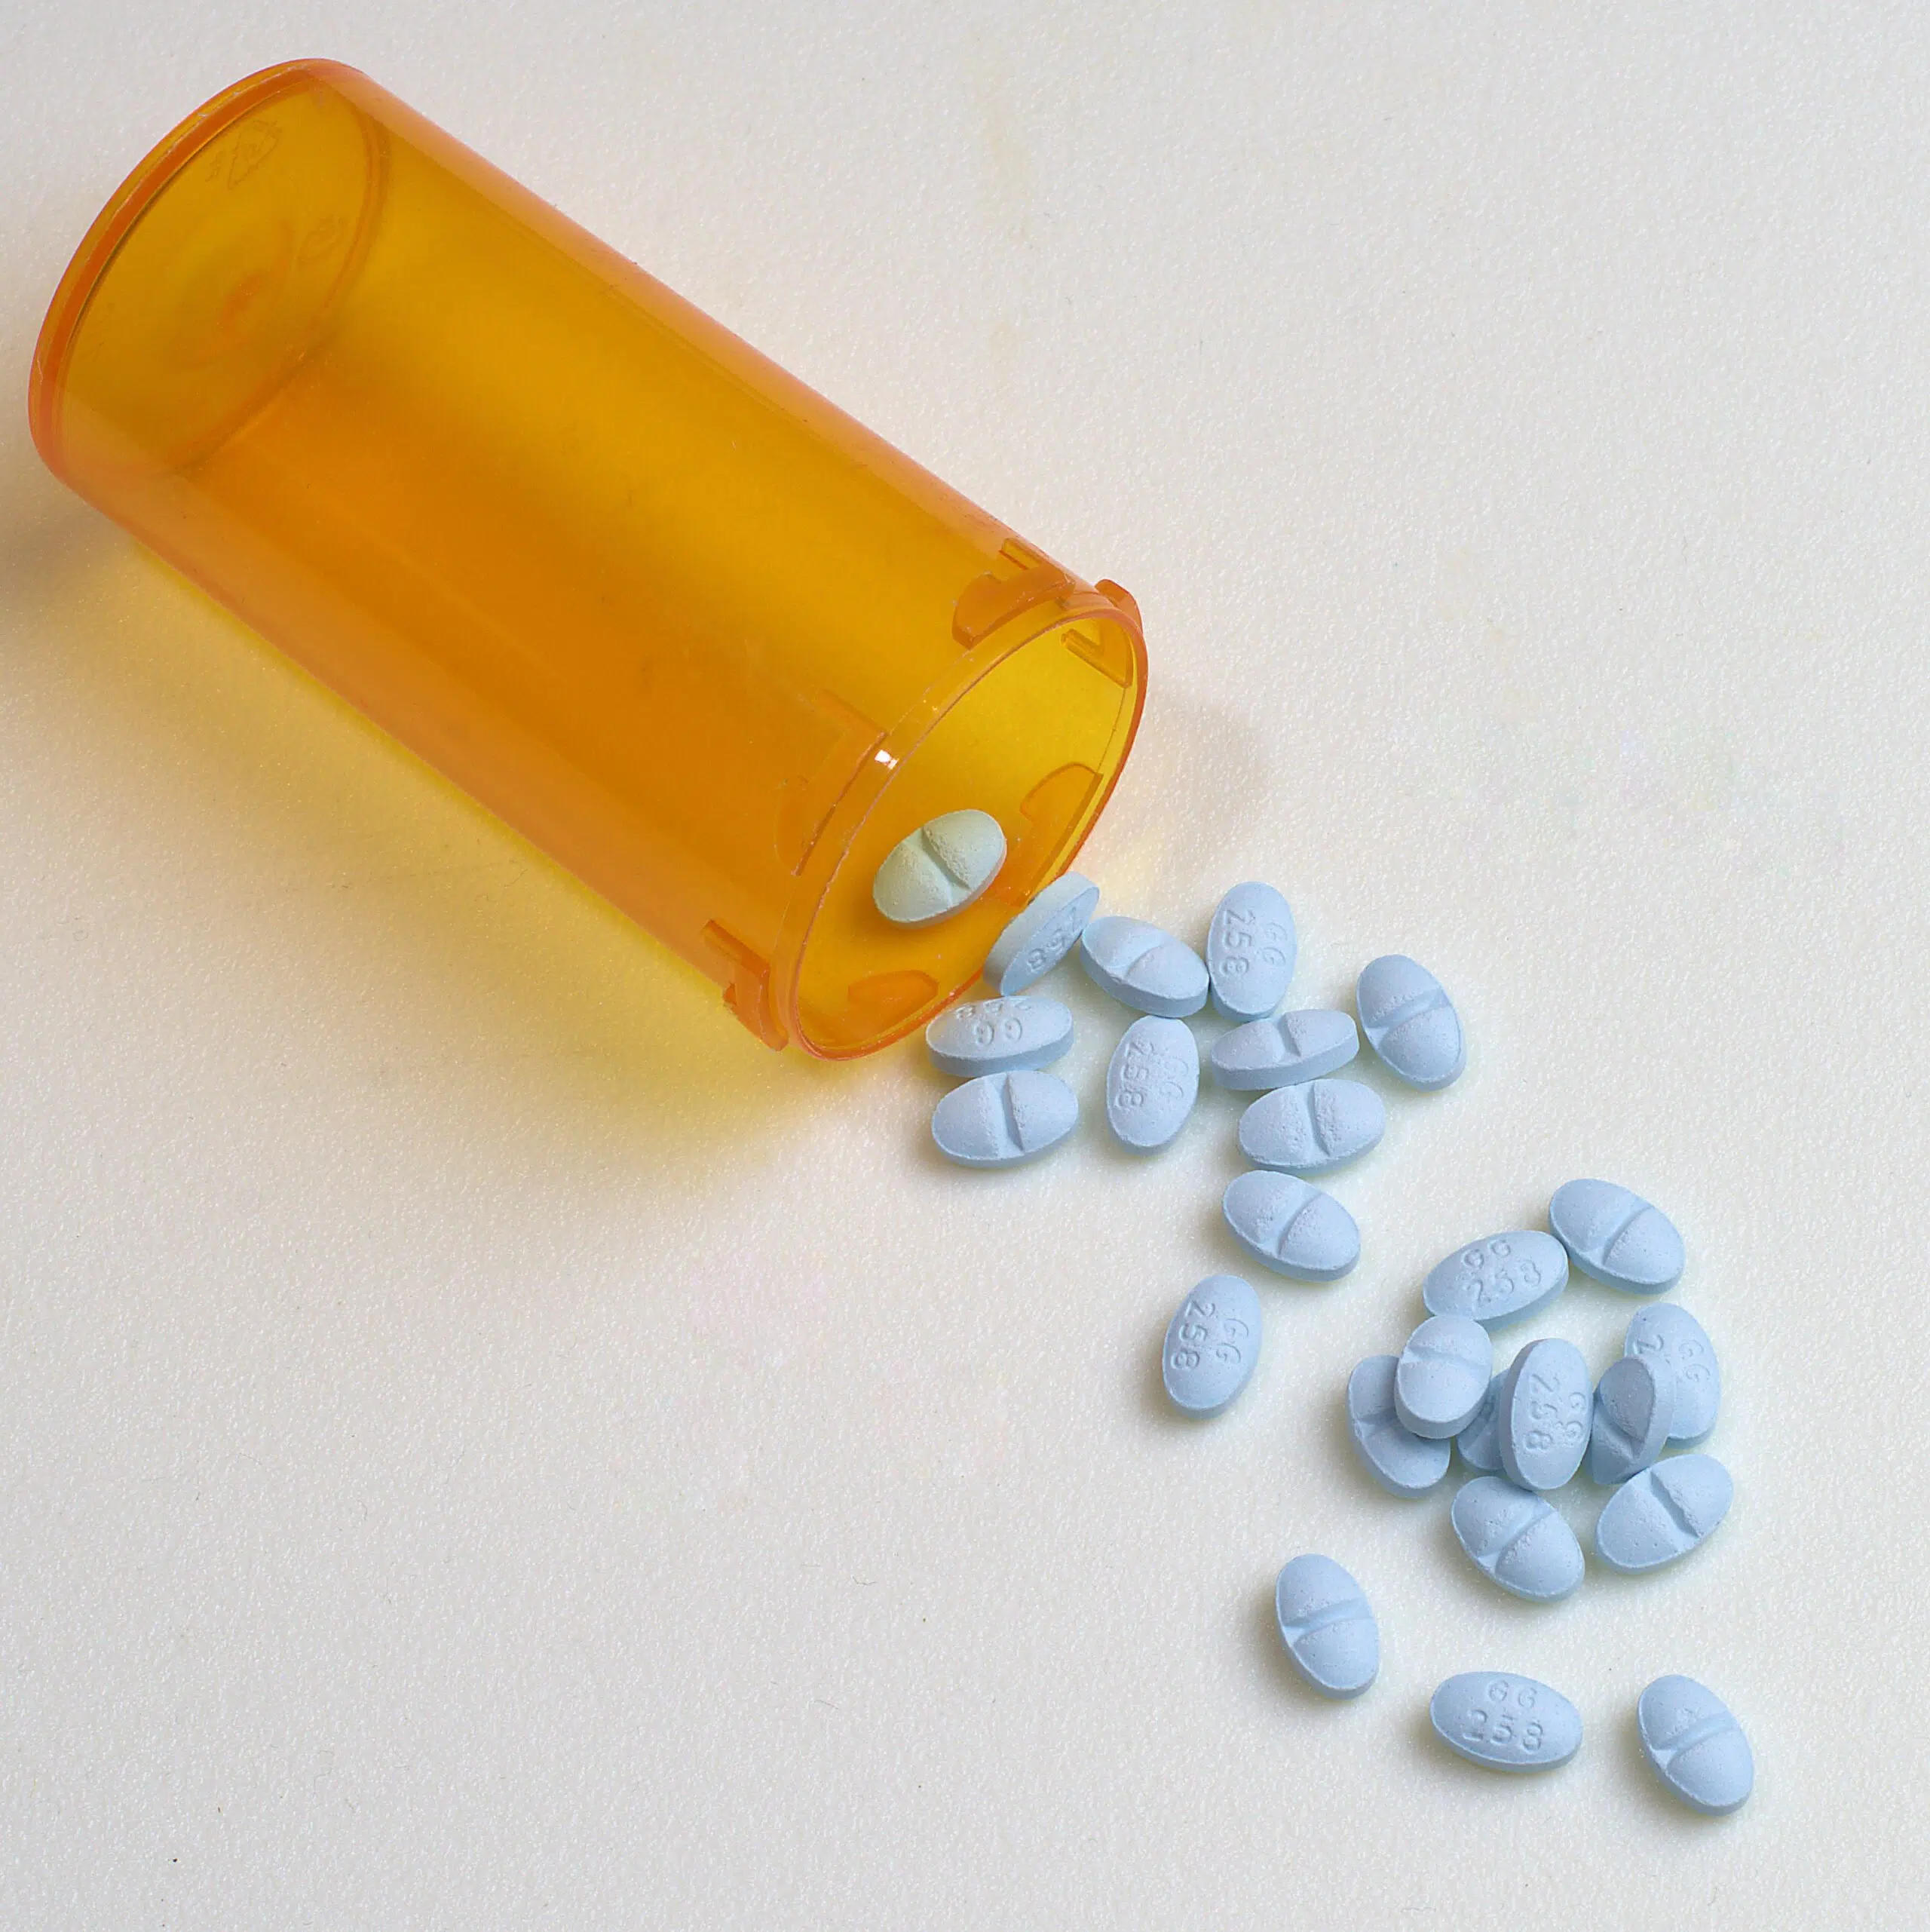 What Are the Dangers of Benzodiazepines